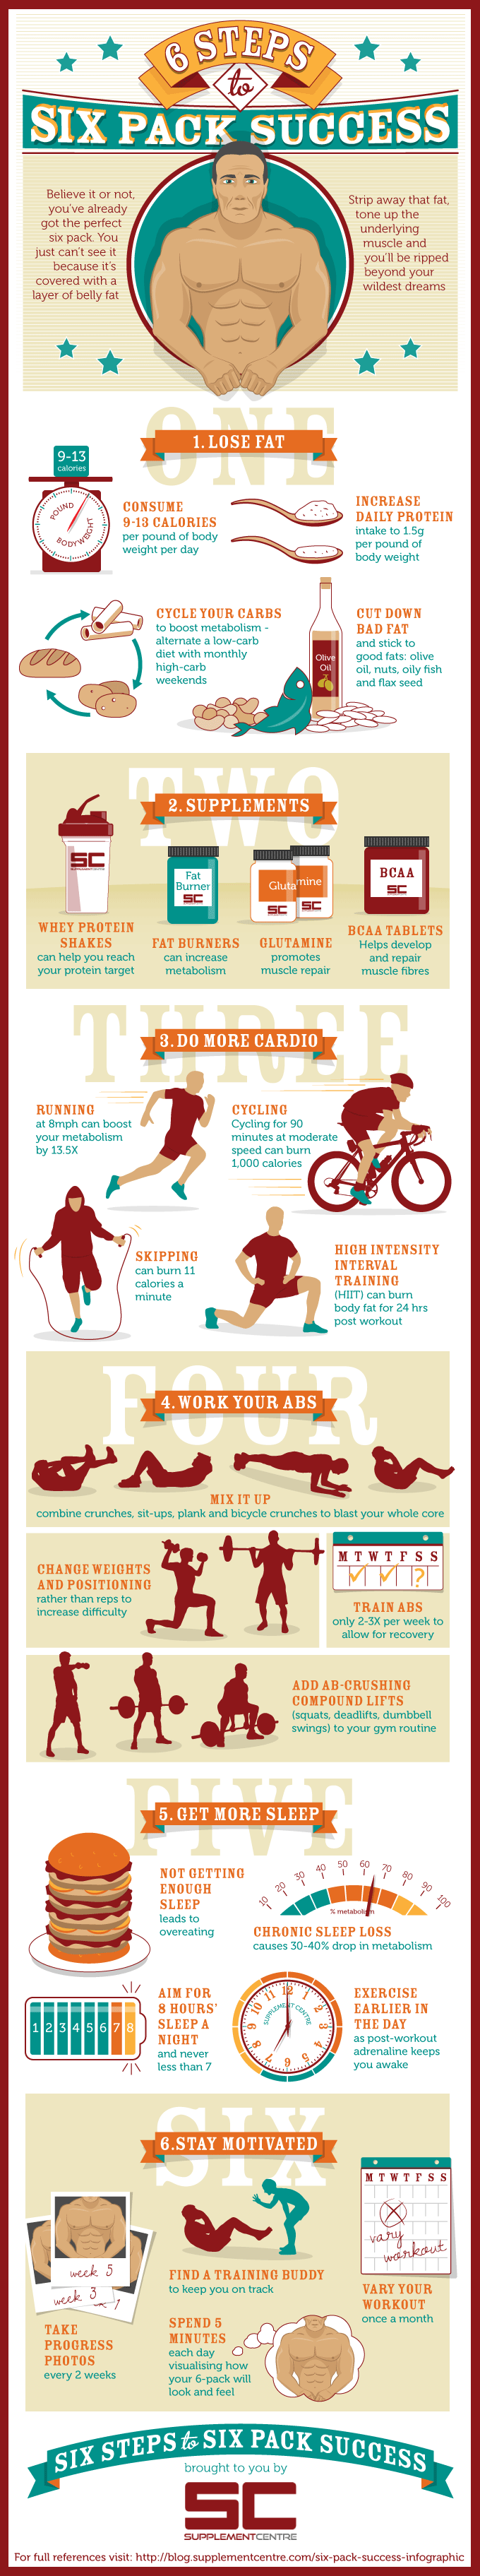 6 Steps to Six Pack Success #infographic